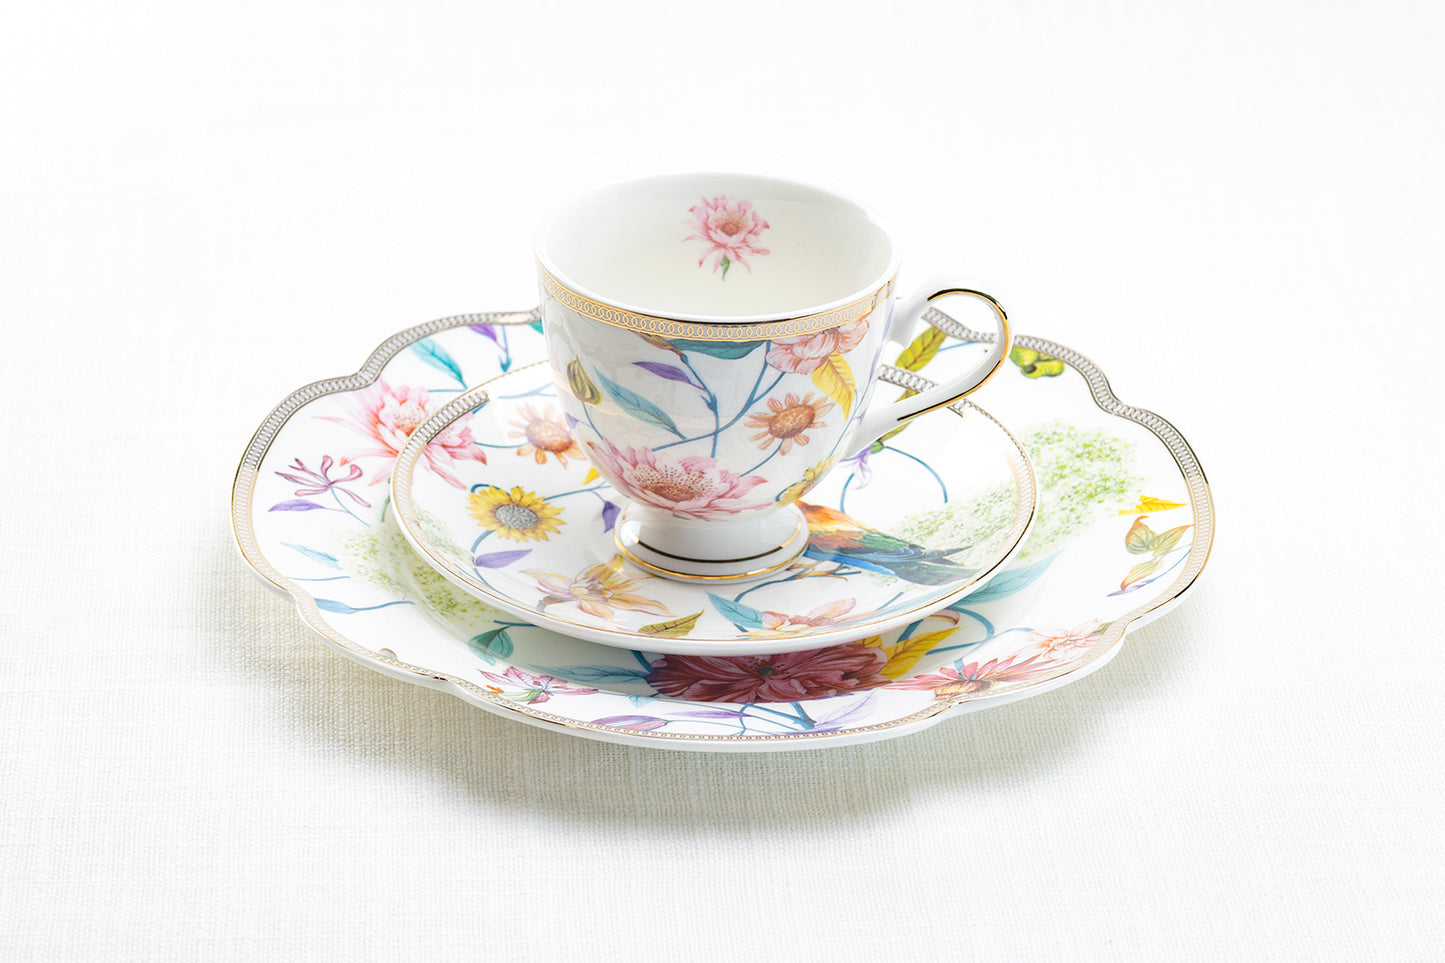 Spring Flowers with Hummingbird Fine Porcelain Tea Cup and Saucer